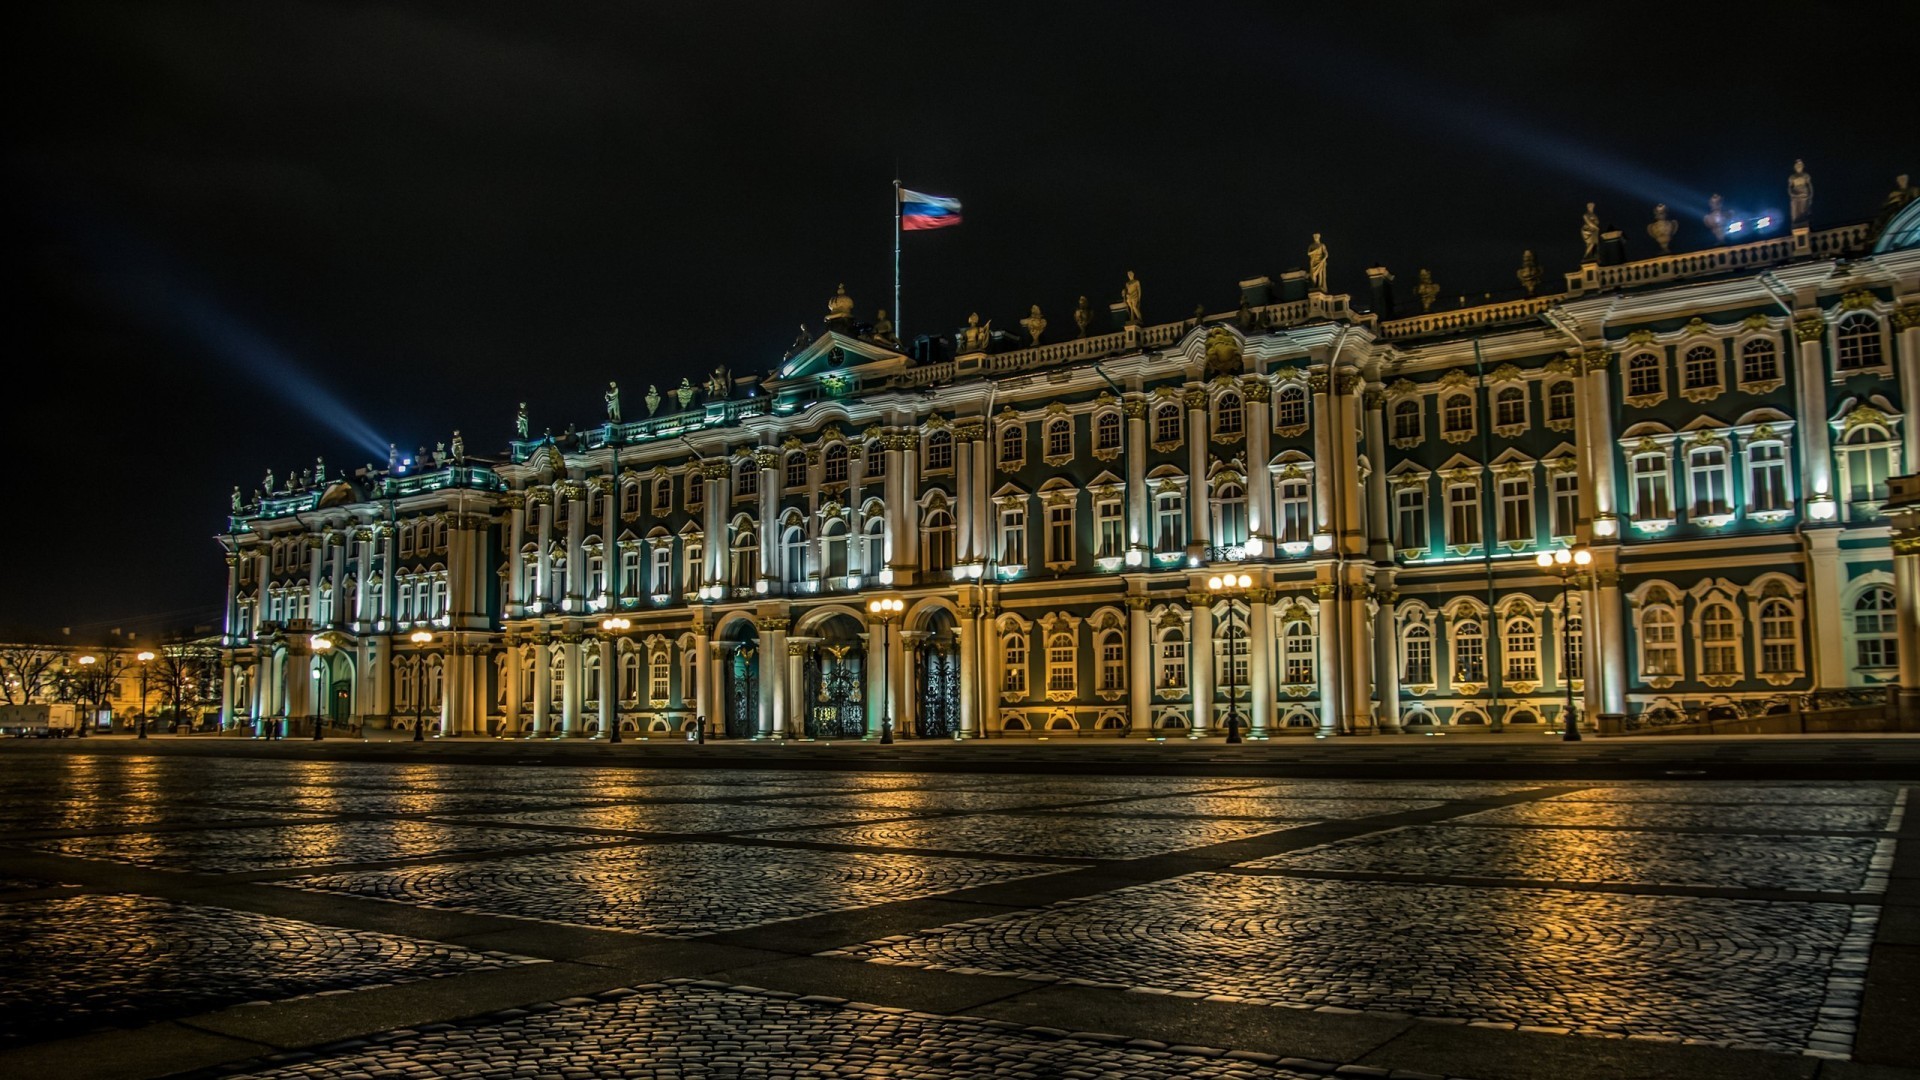 General 1920x1080 architecture flag night building Russia St. Petersburg Hermitage